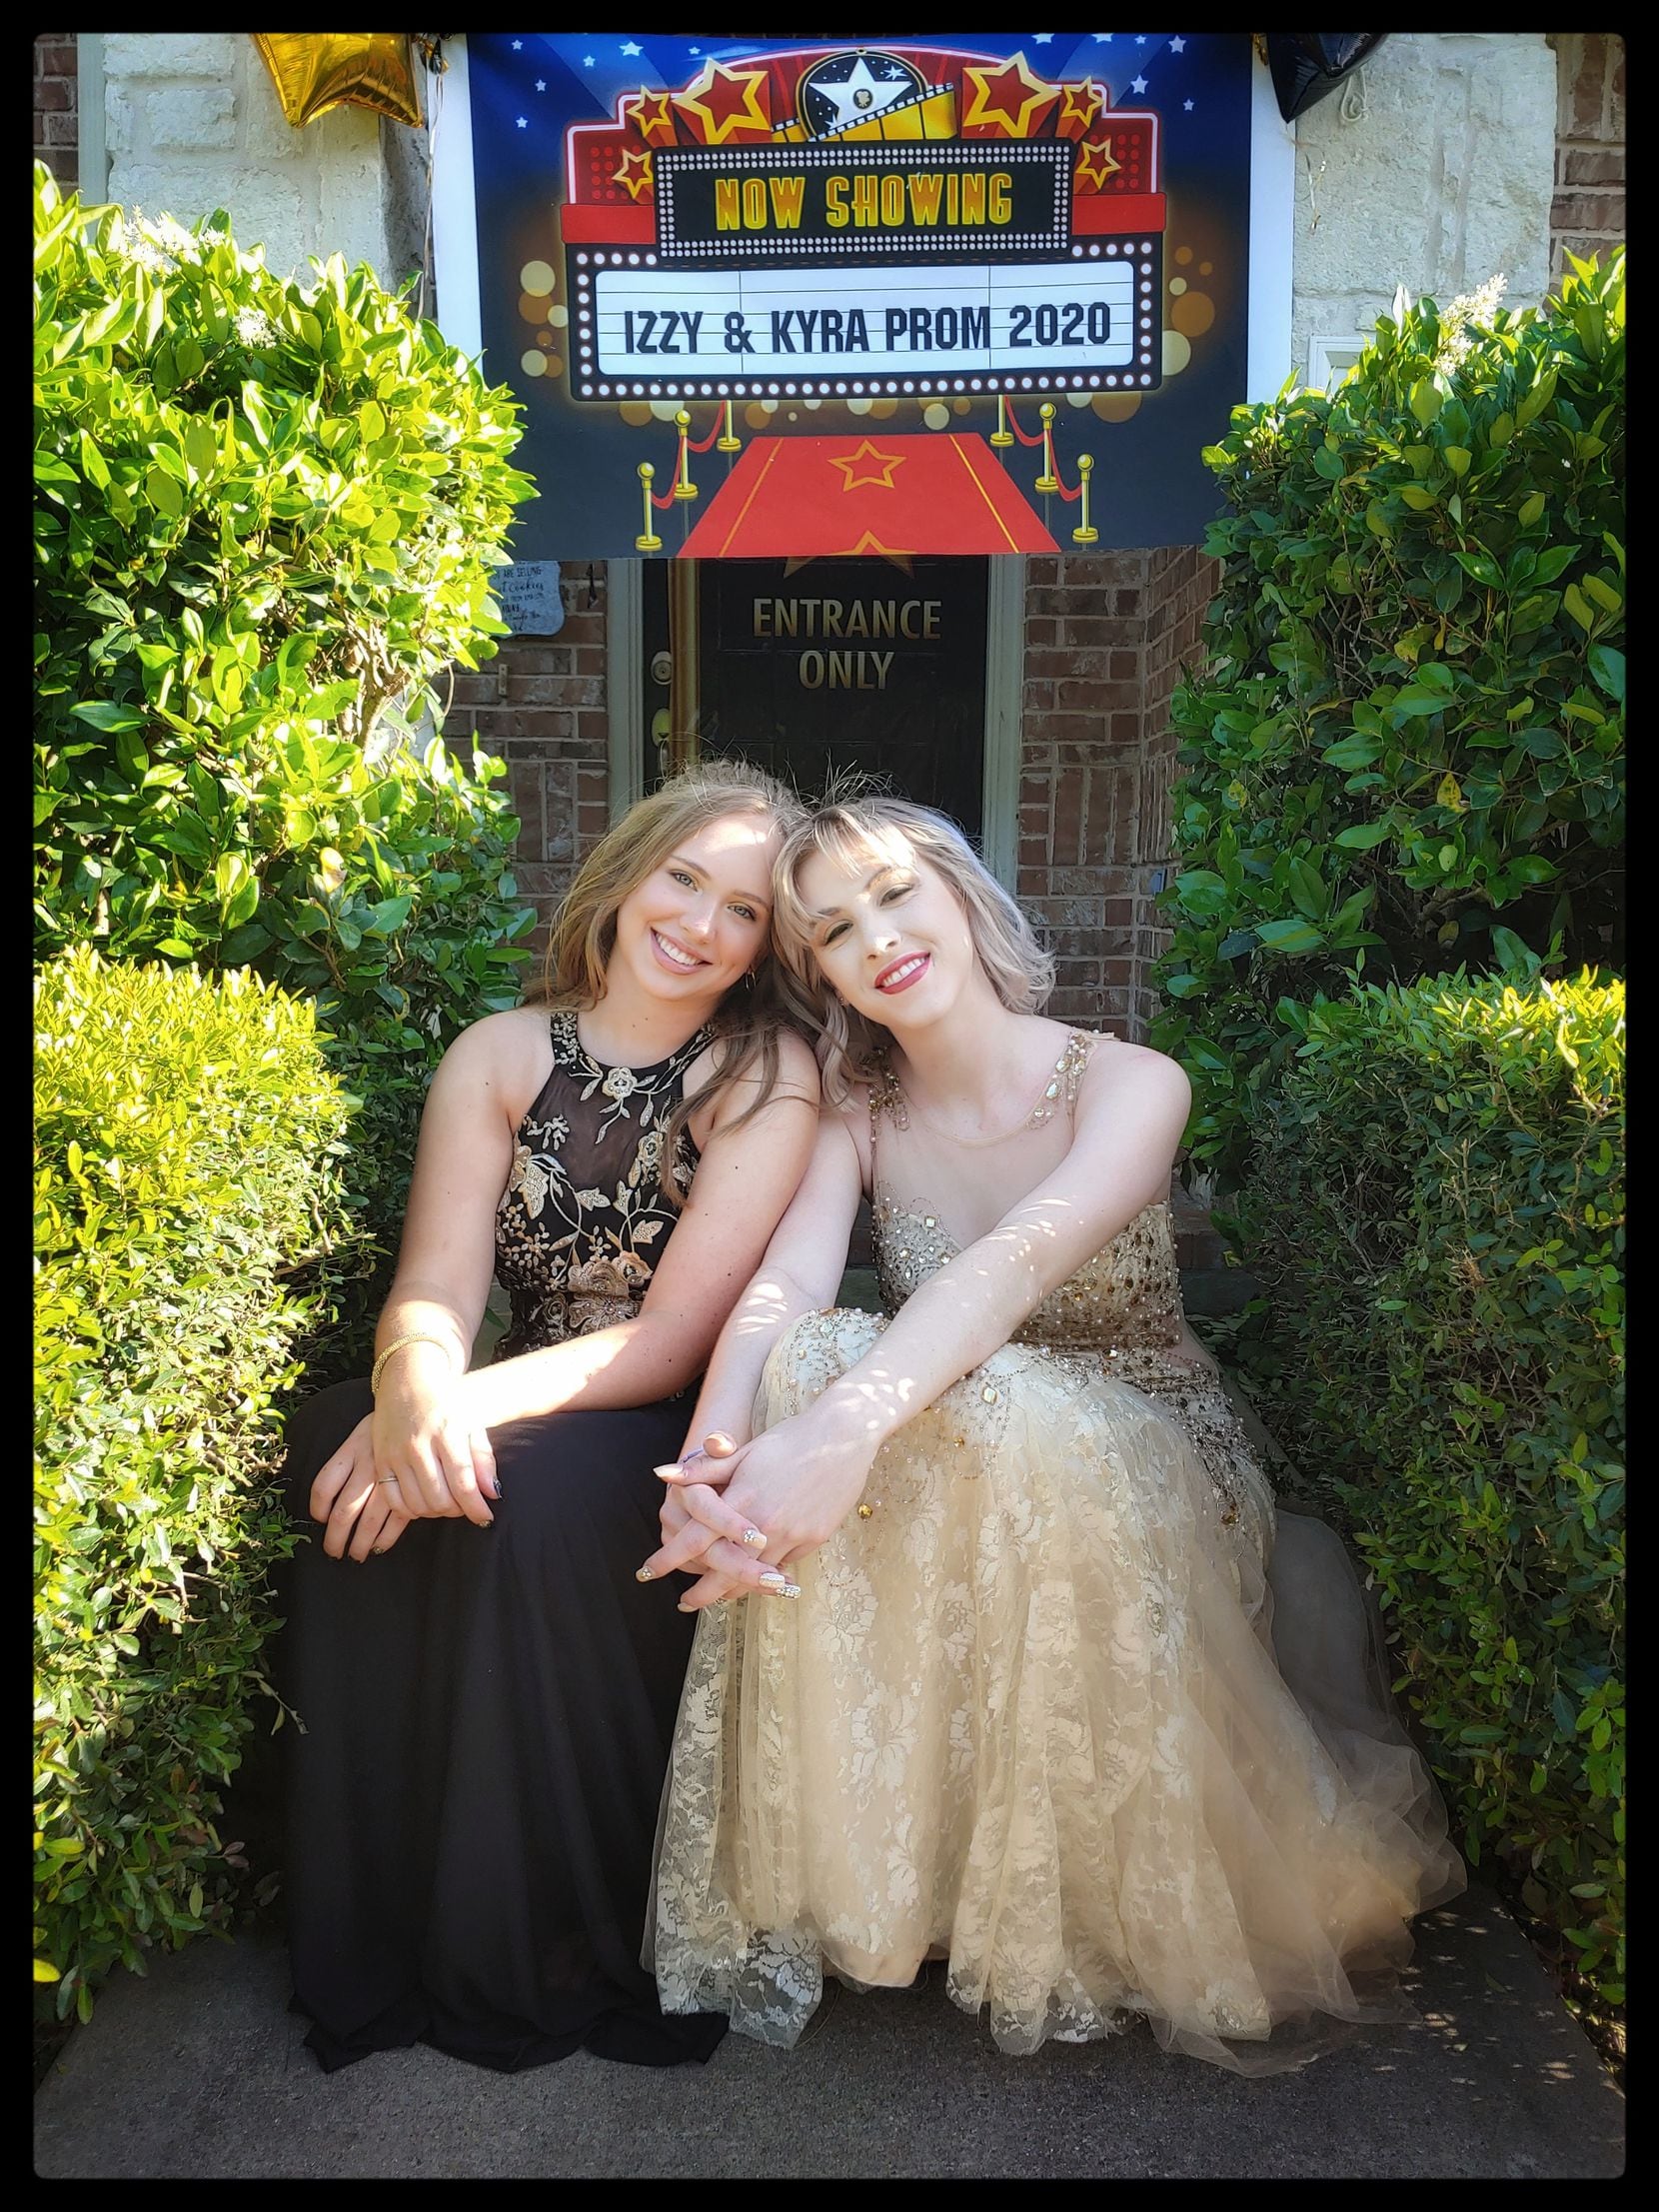 Isabelle Tye (left) celebrated prom at home in Frisco with her friend Kyra Bridges.